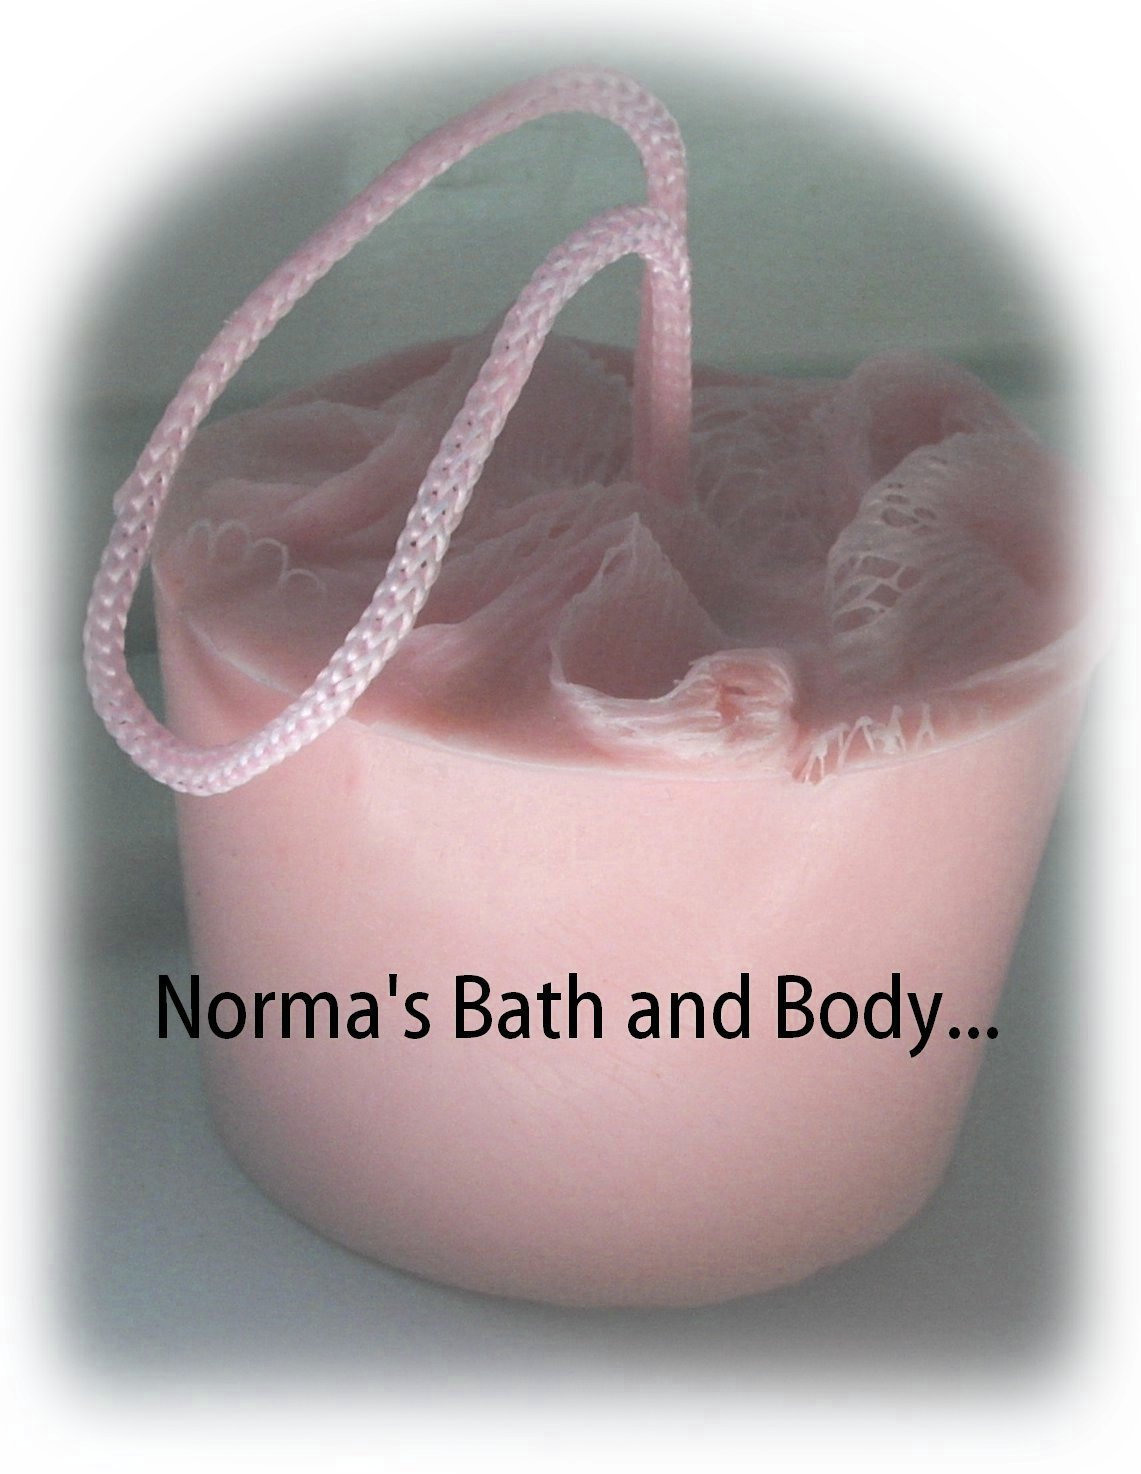 Raspberry Glycerin Soap On A Rope, Soap On Rope, Soap, Glycerin Soap, Fruity Soap, Bath, Normas Bath And Body